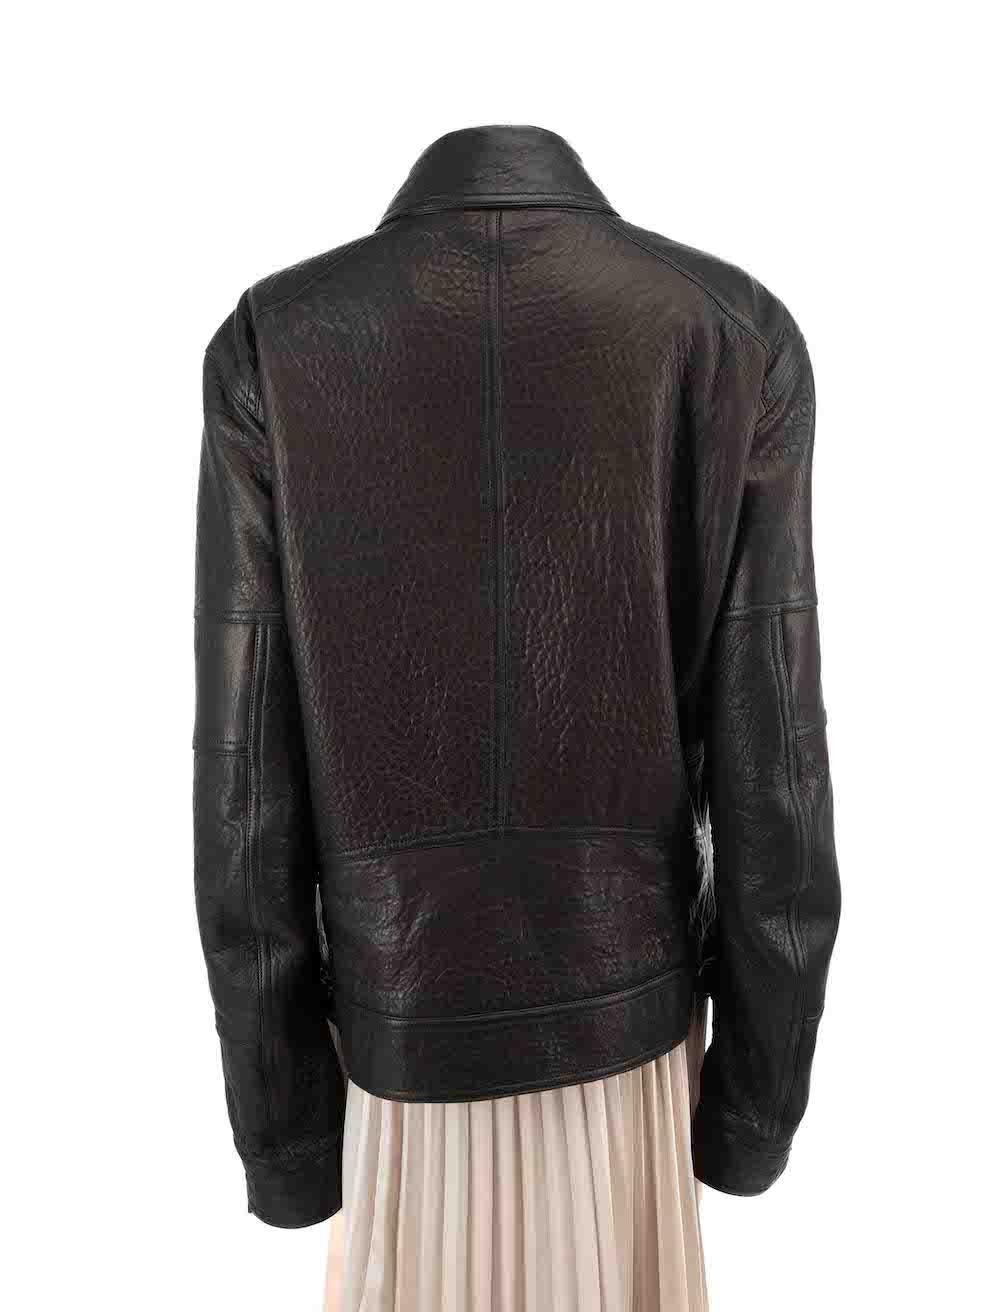 Belstaff Black Leather Zip Full Jacket Size 5XL In Good Condition For Sale In London, GB